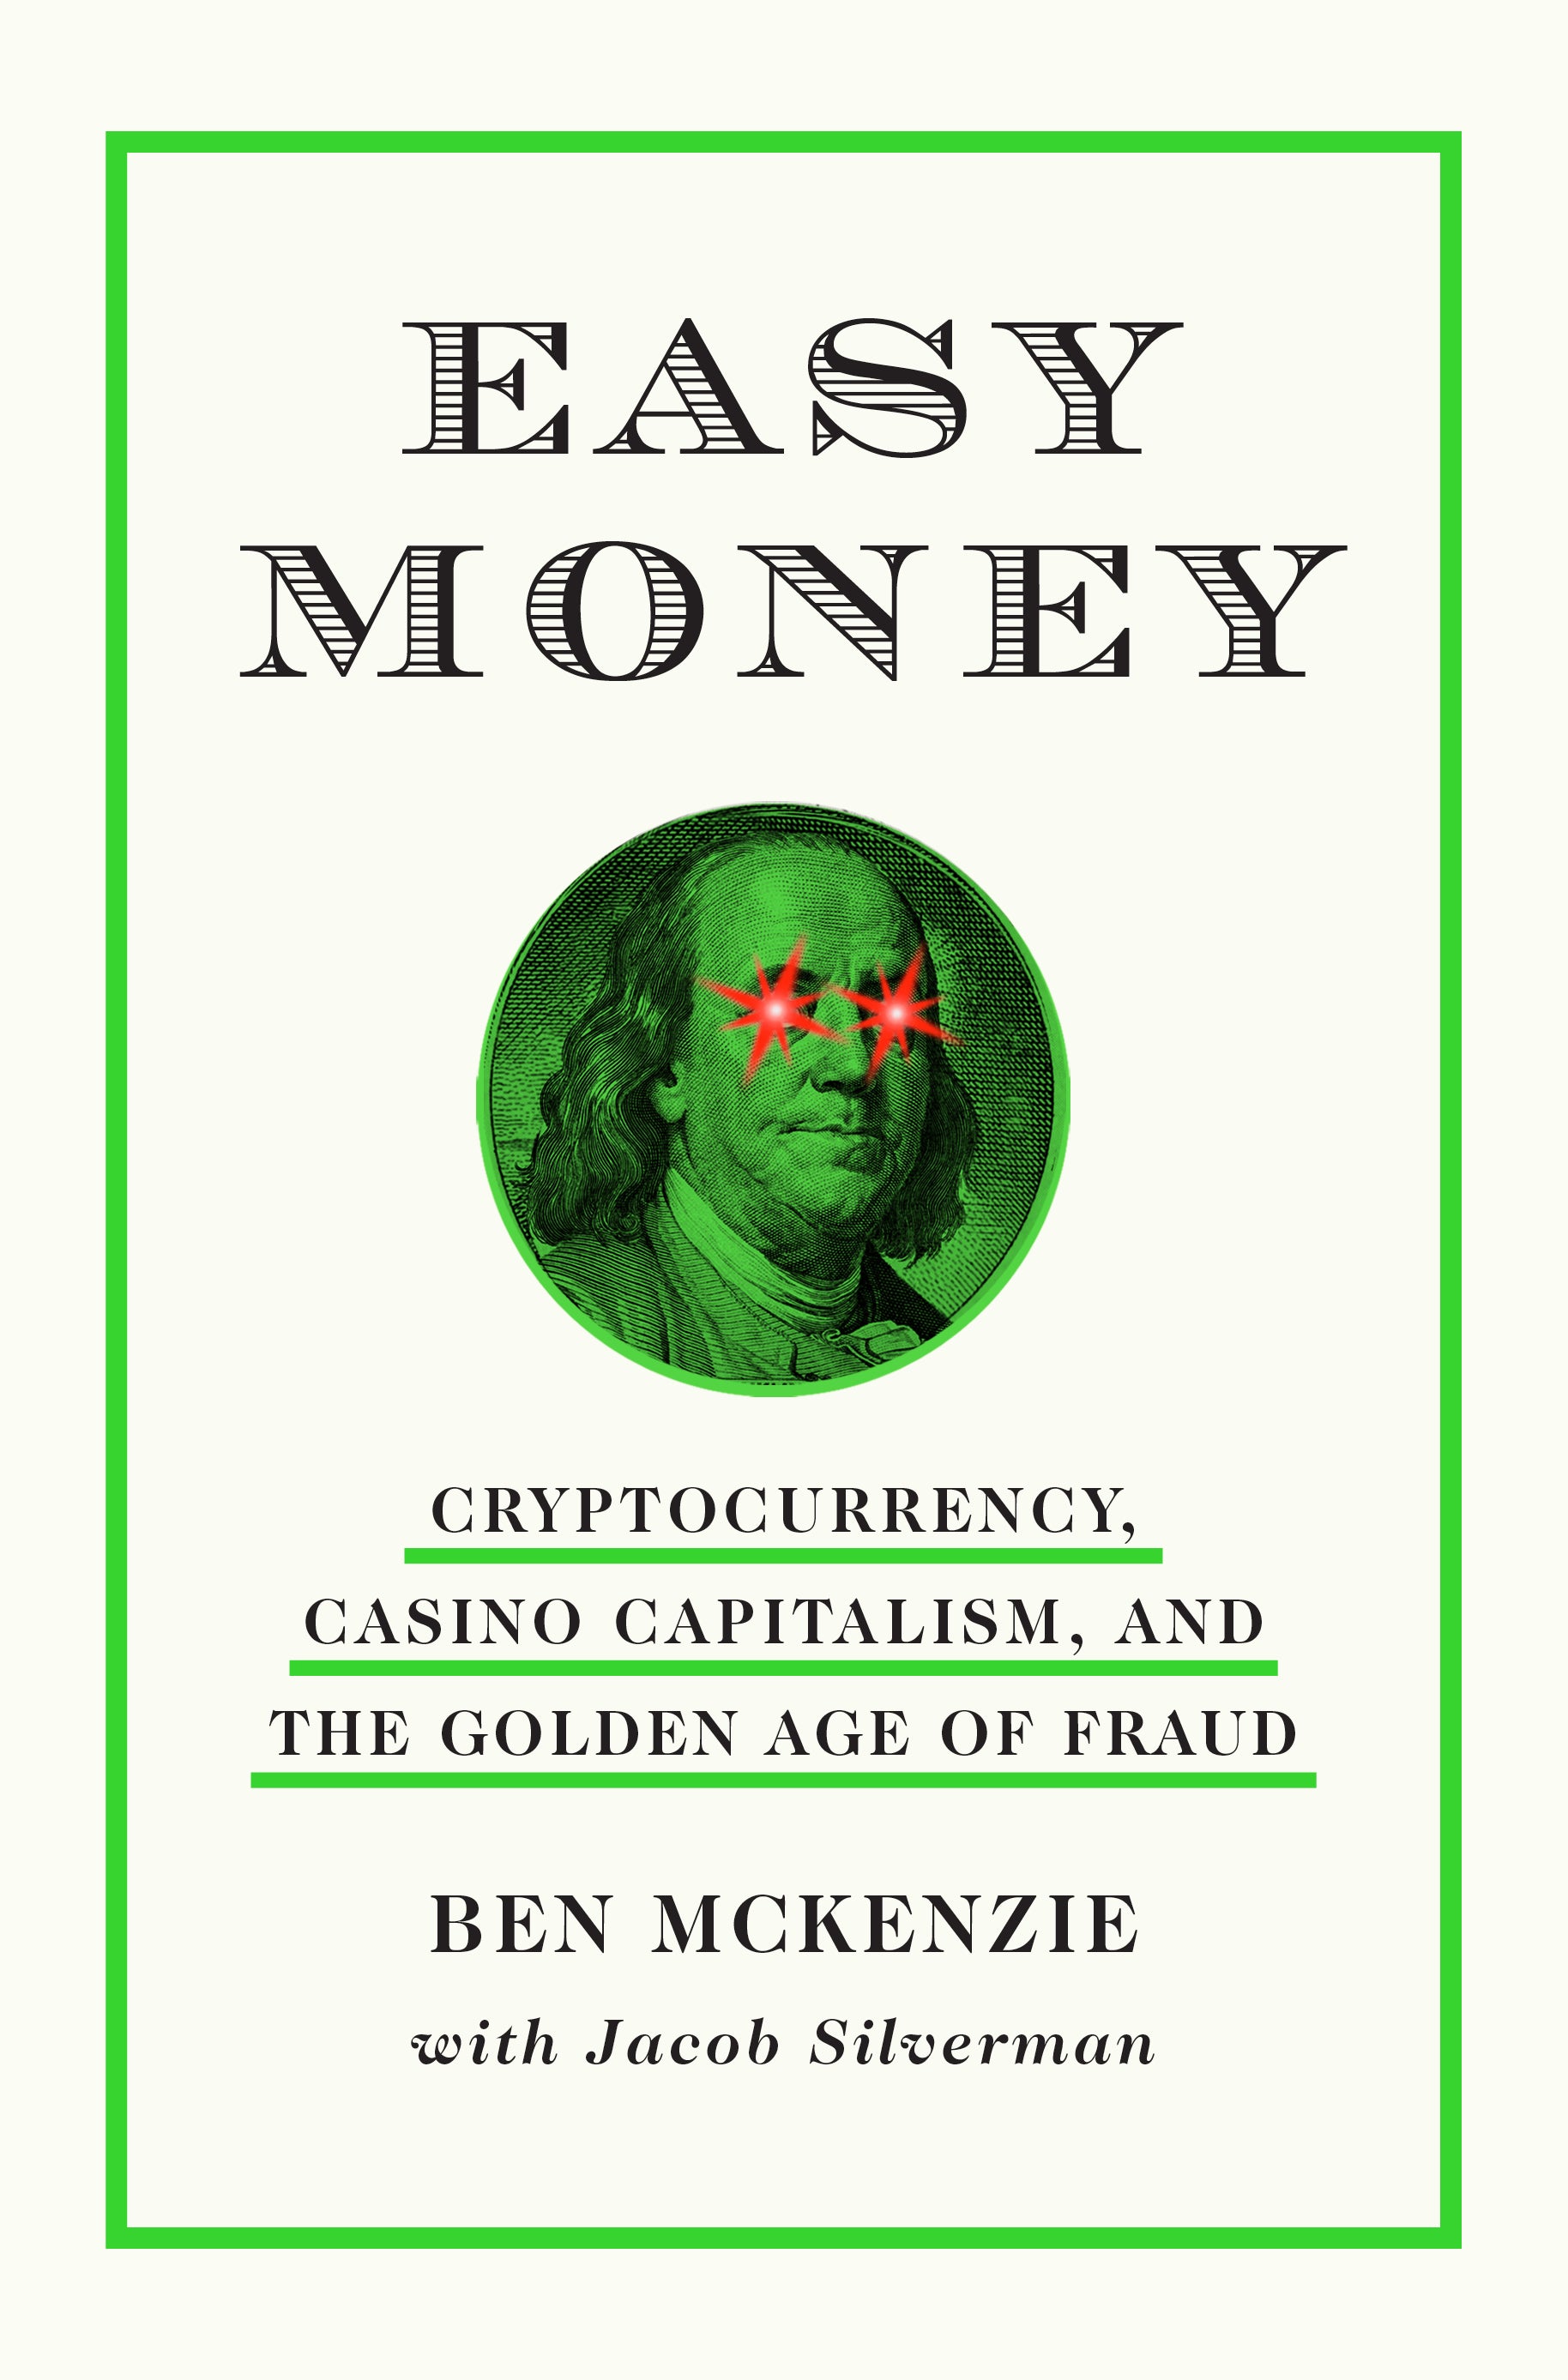 Easy Money: Cryptocurrency, Casino Capitalism, and the Golden Age of Fraud, written by Ben McKenzie and Jacob Silverman